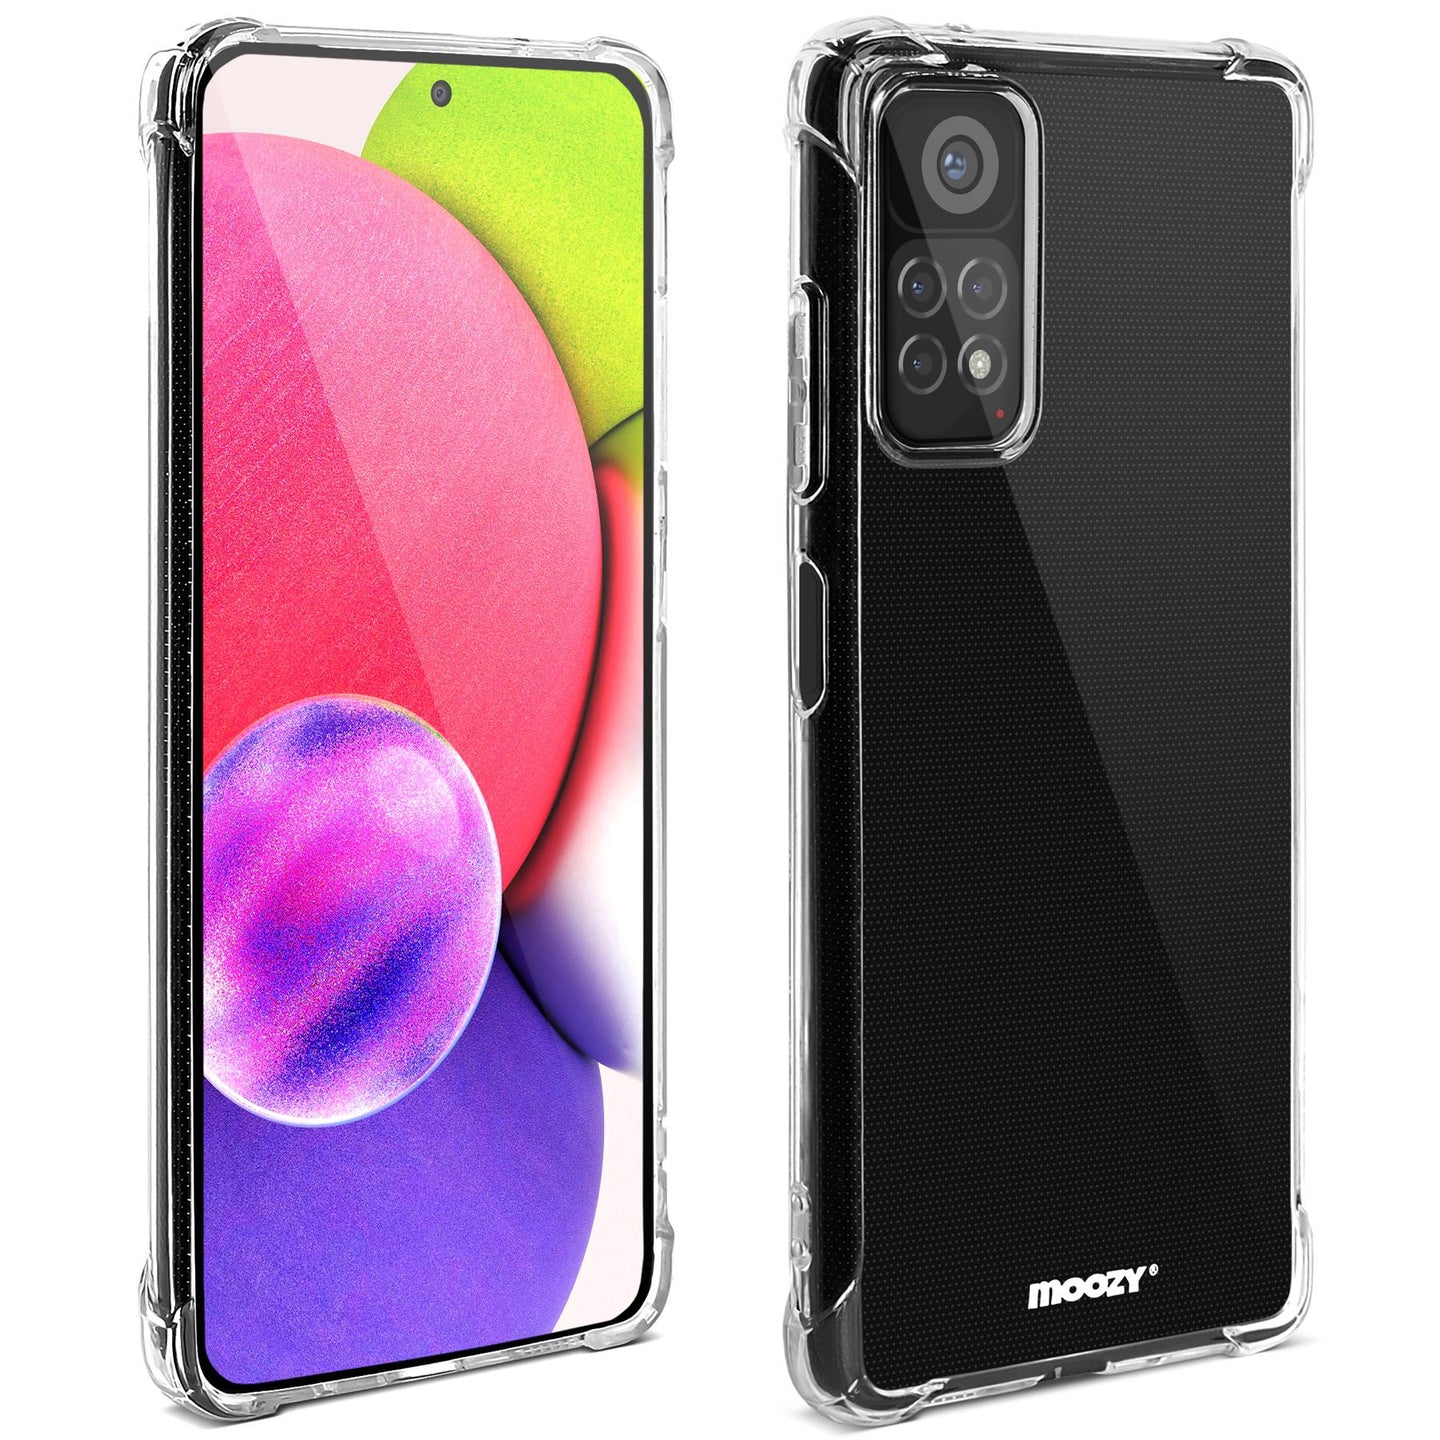 Moozy Shockproof Silicone Case for Xiaomi Redmi Note 11 Pro 5G and 4G - Transparent Case with Shock Absorbing 3D Corners Crystal Clear Protective Phone Case Soft TPU Silicone Cover